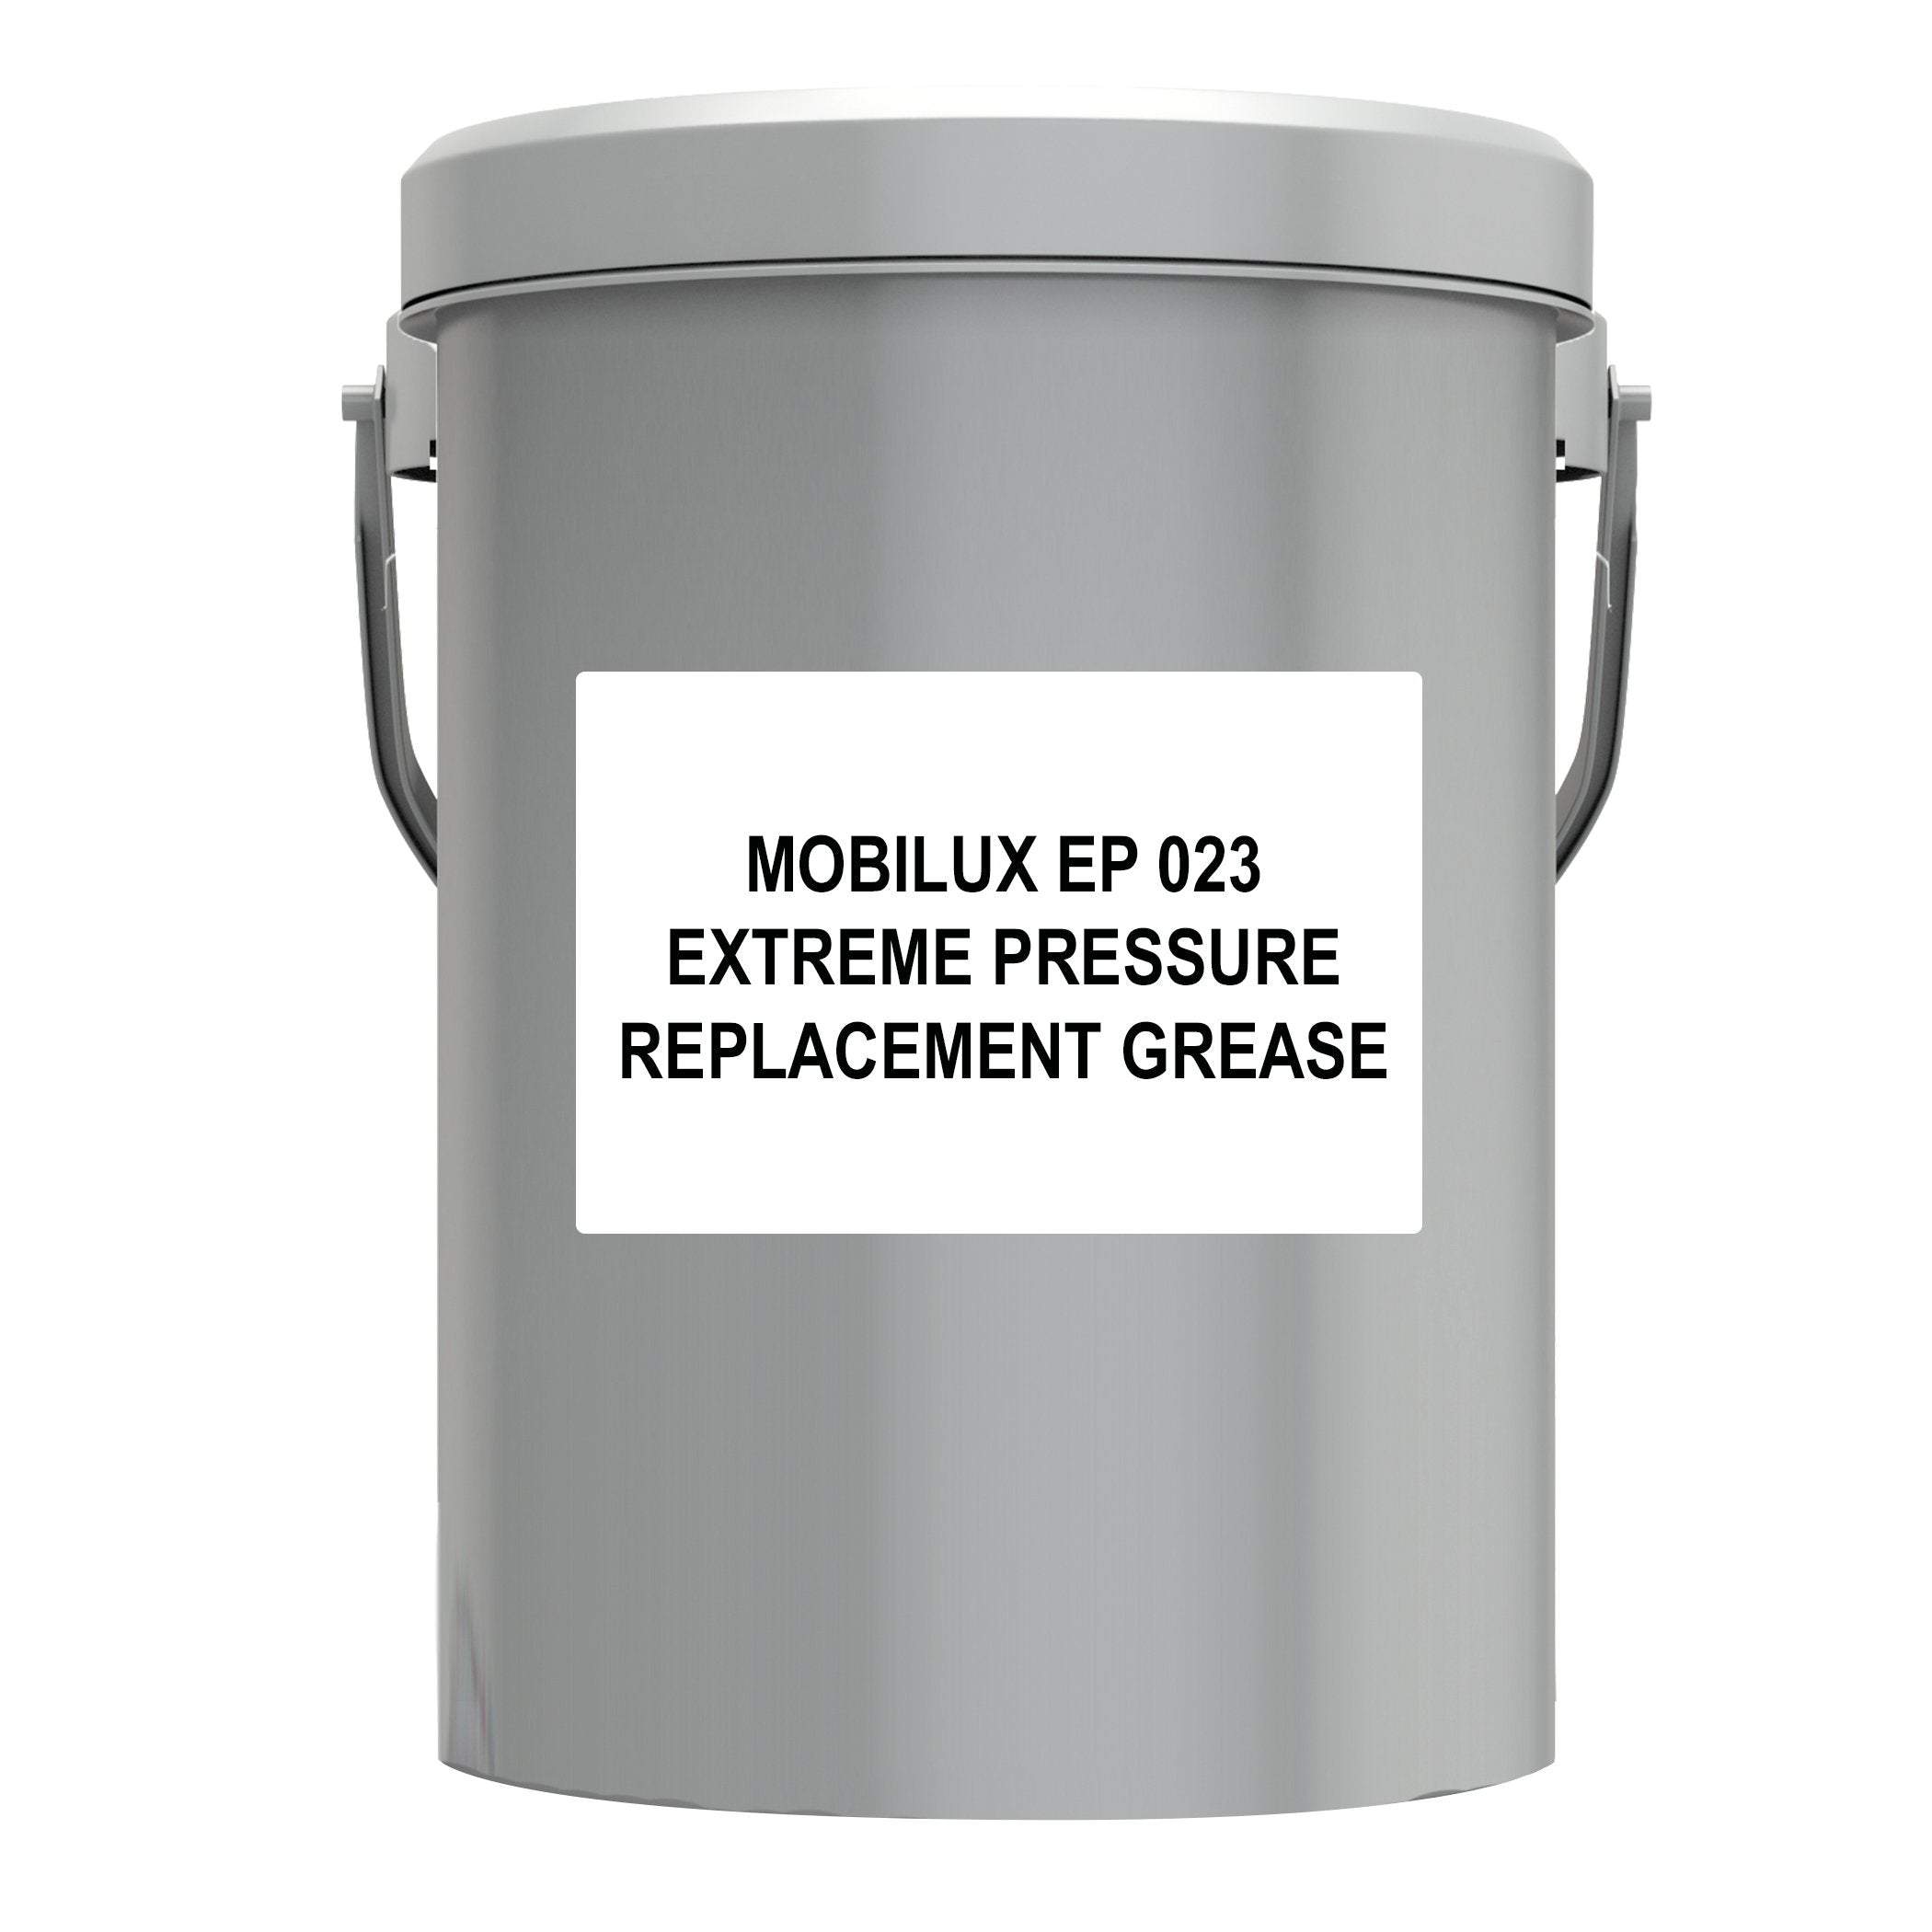 Mobilux EP 023 Extreme Pressure Replacement Grease by RDT - 35LB Pail